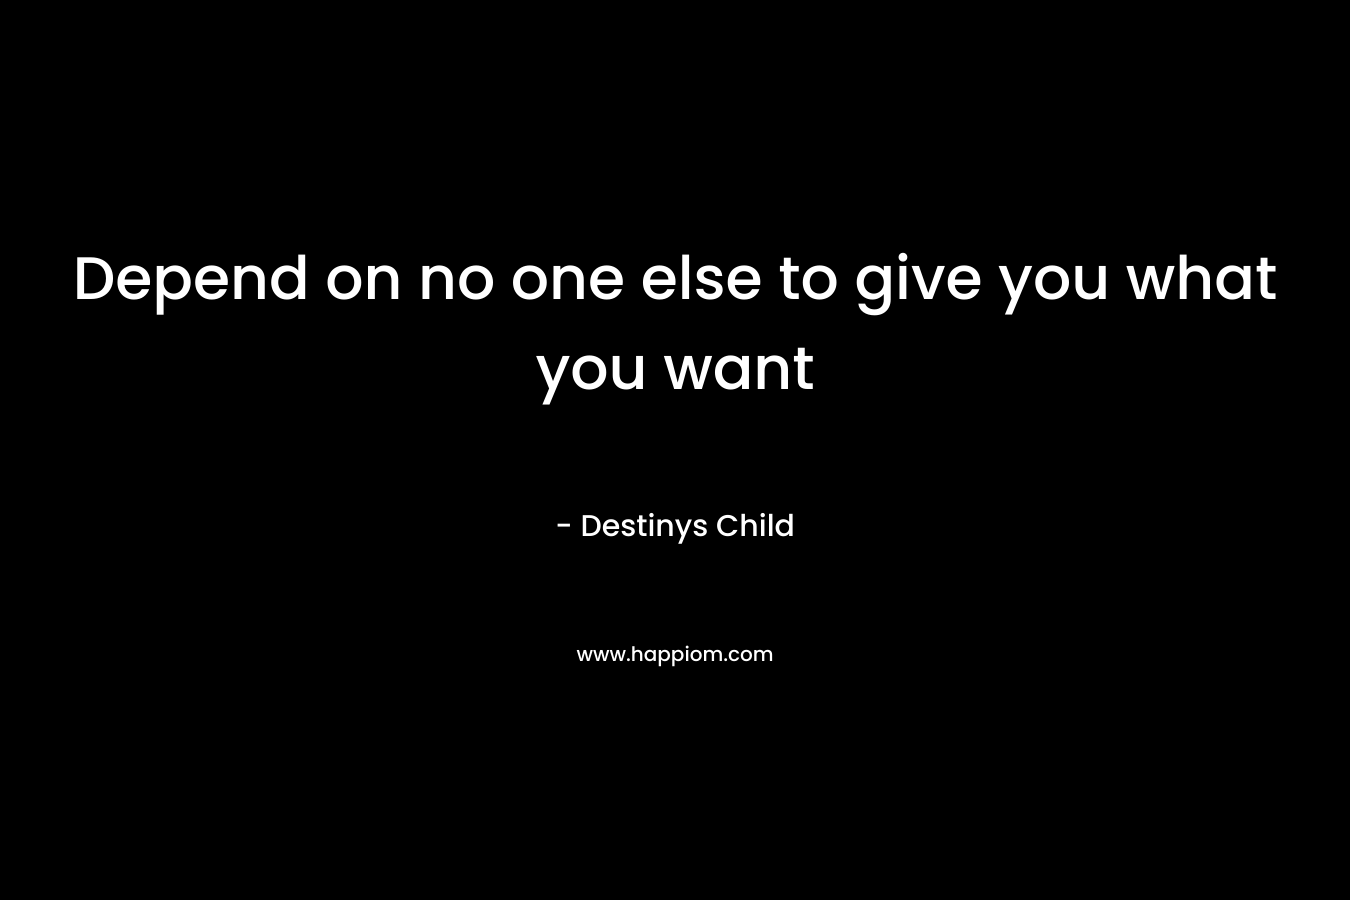 Depend on no one else to give you what you want